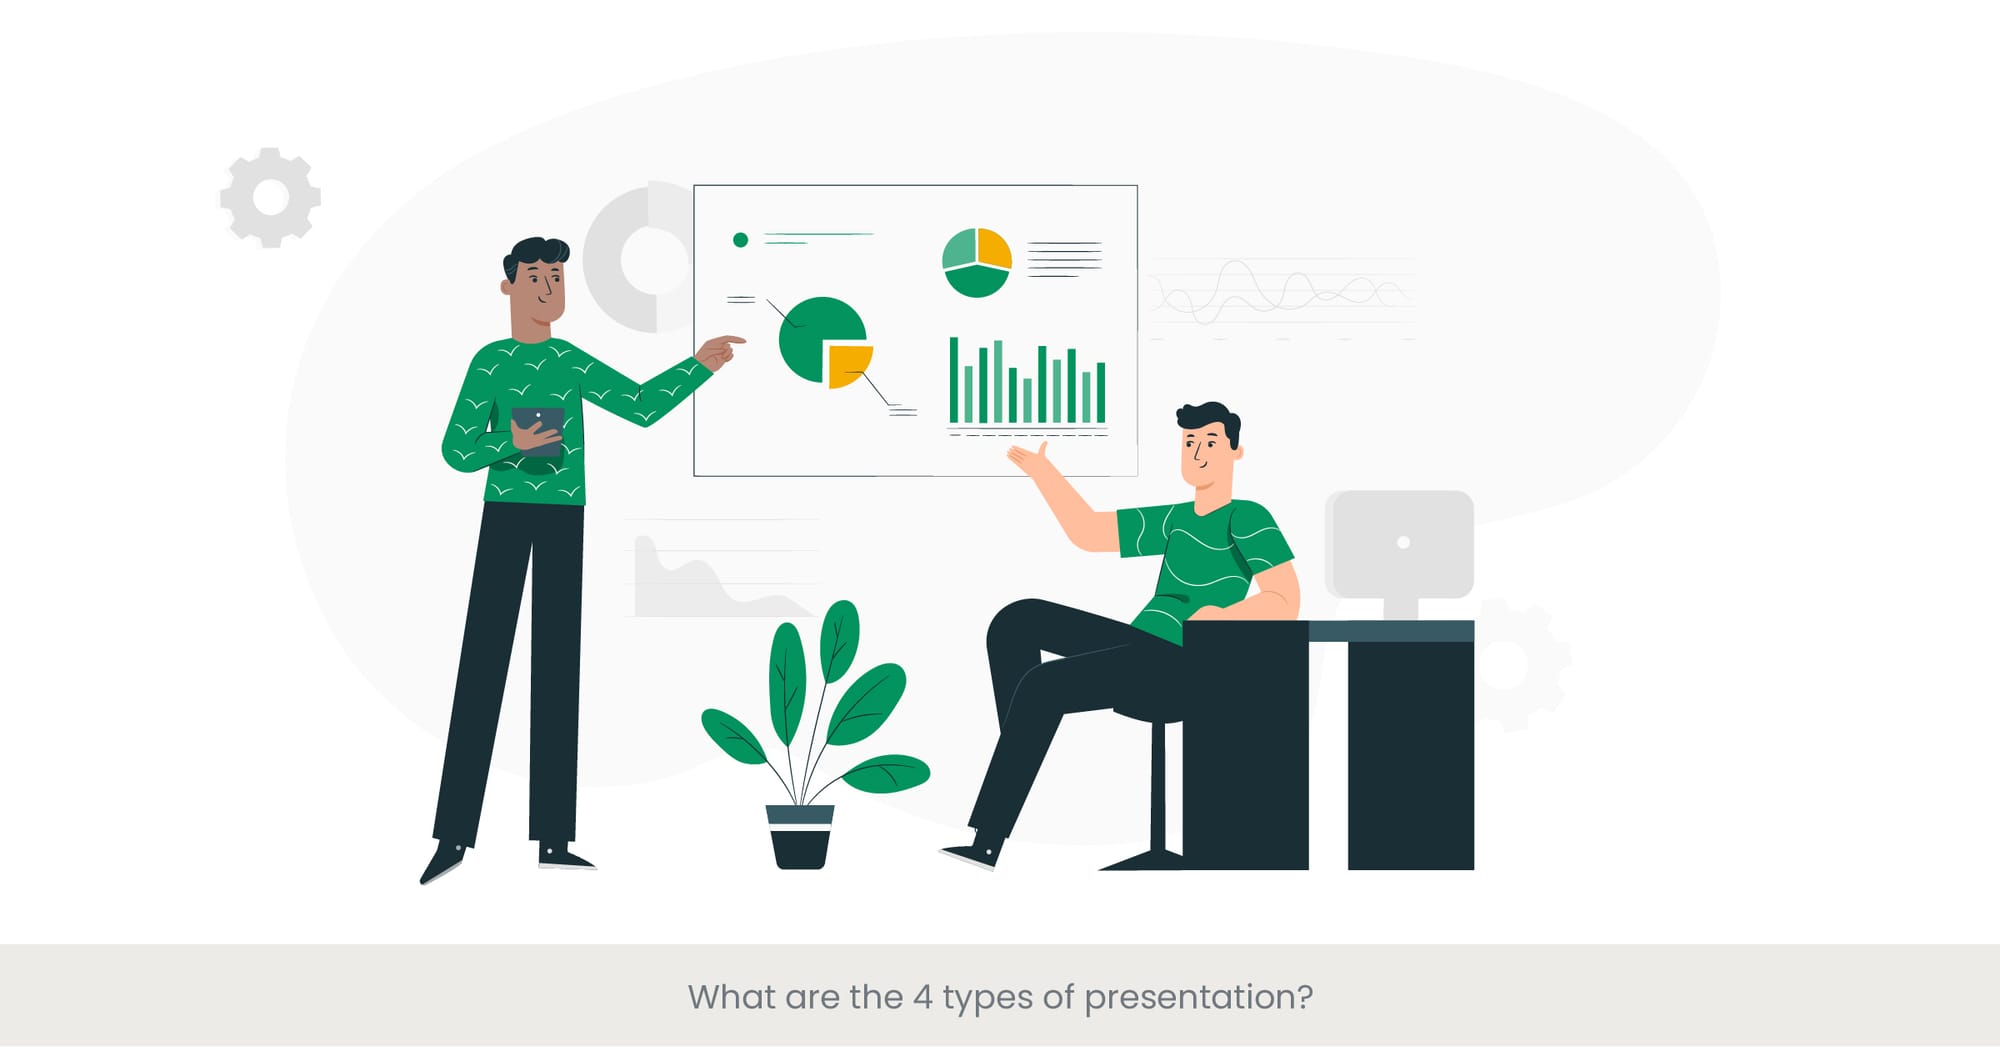 What are the 4 types of presentation